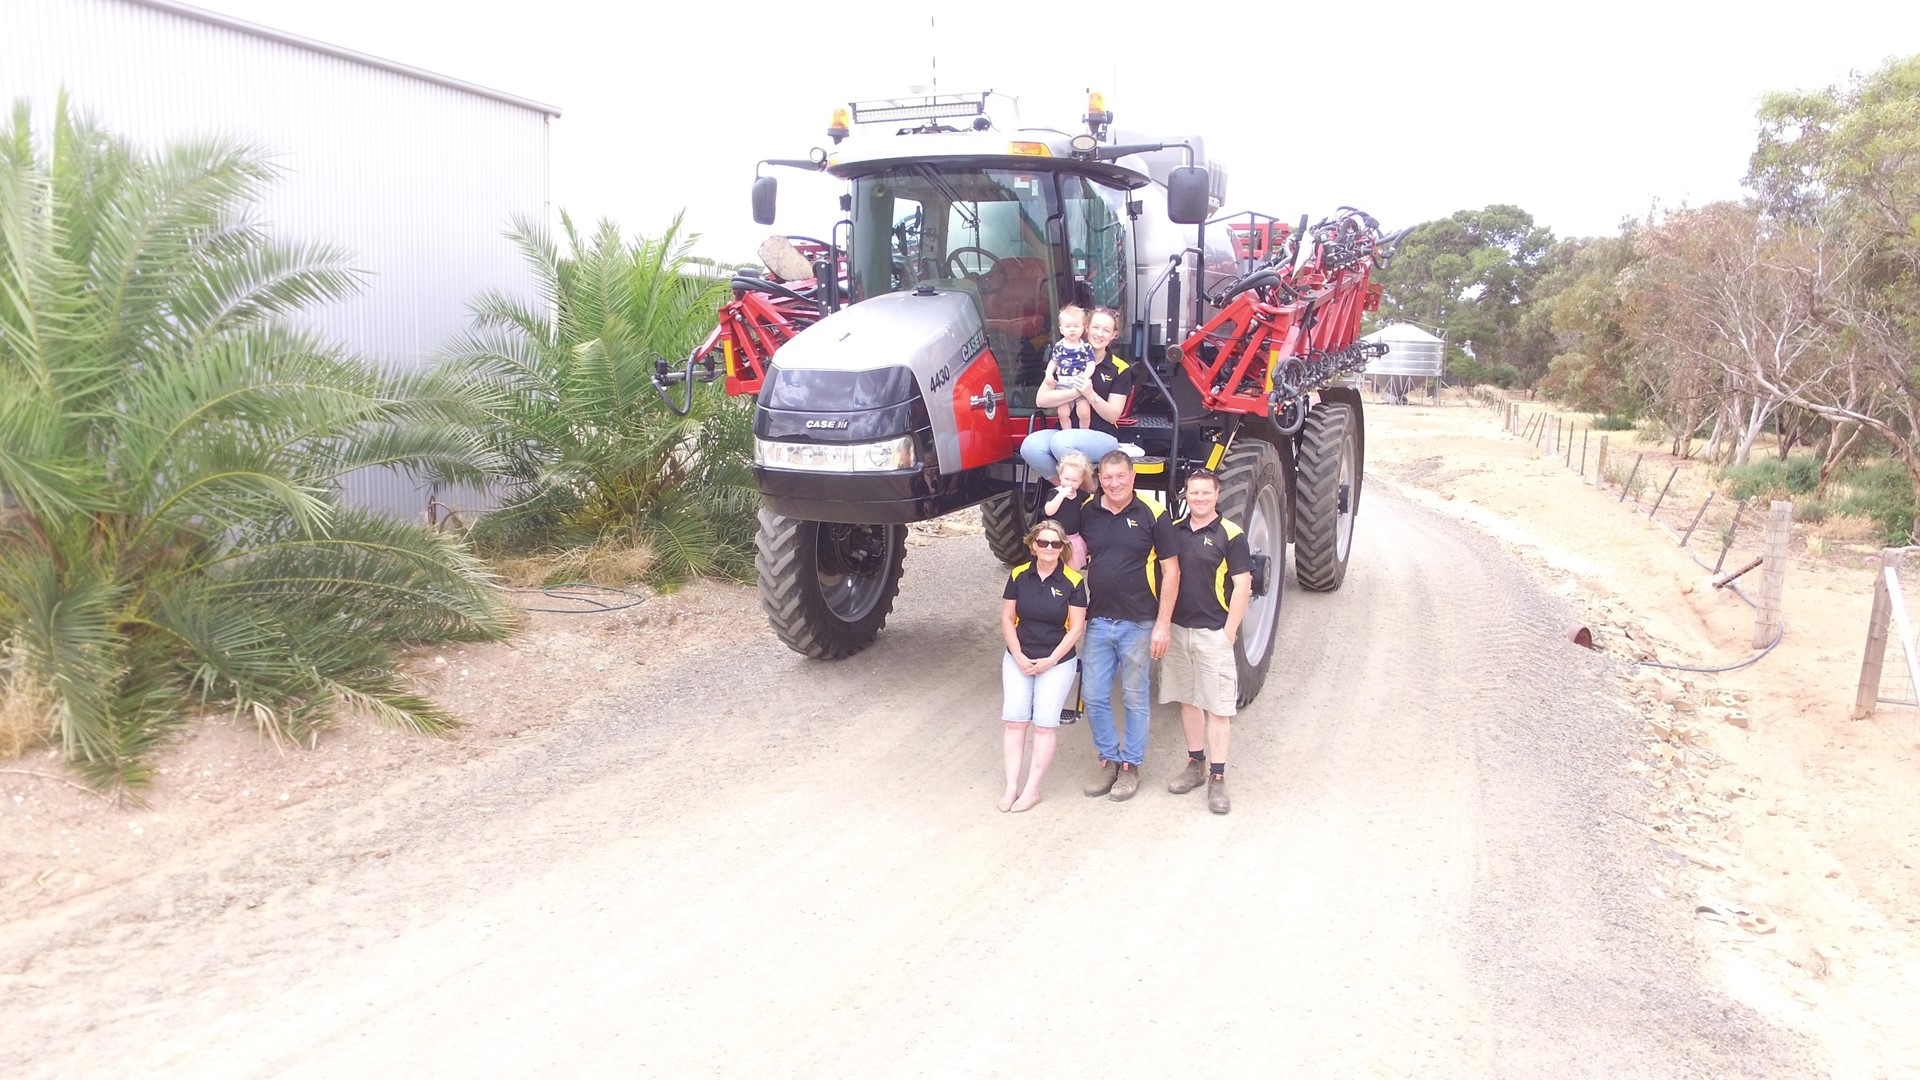 The Krieg family with their hardworking, special anniversary Patriot sprayer.